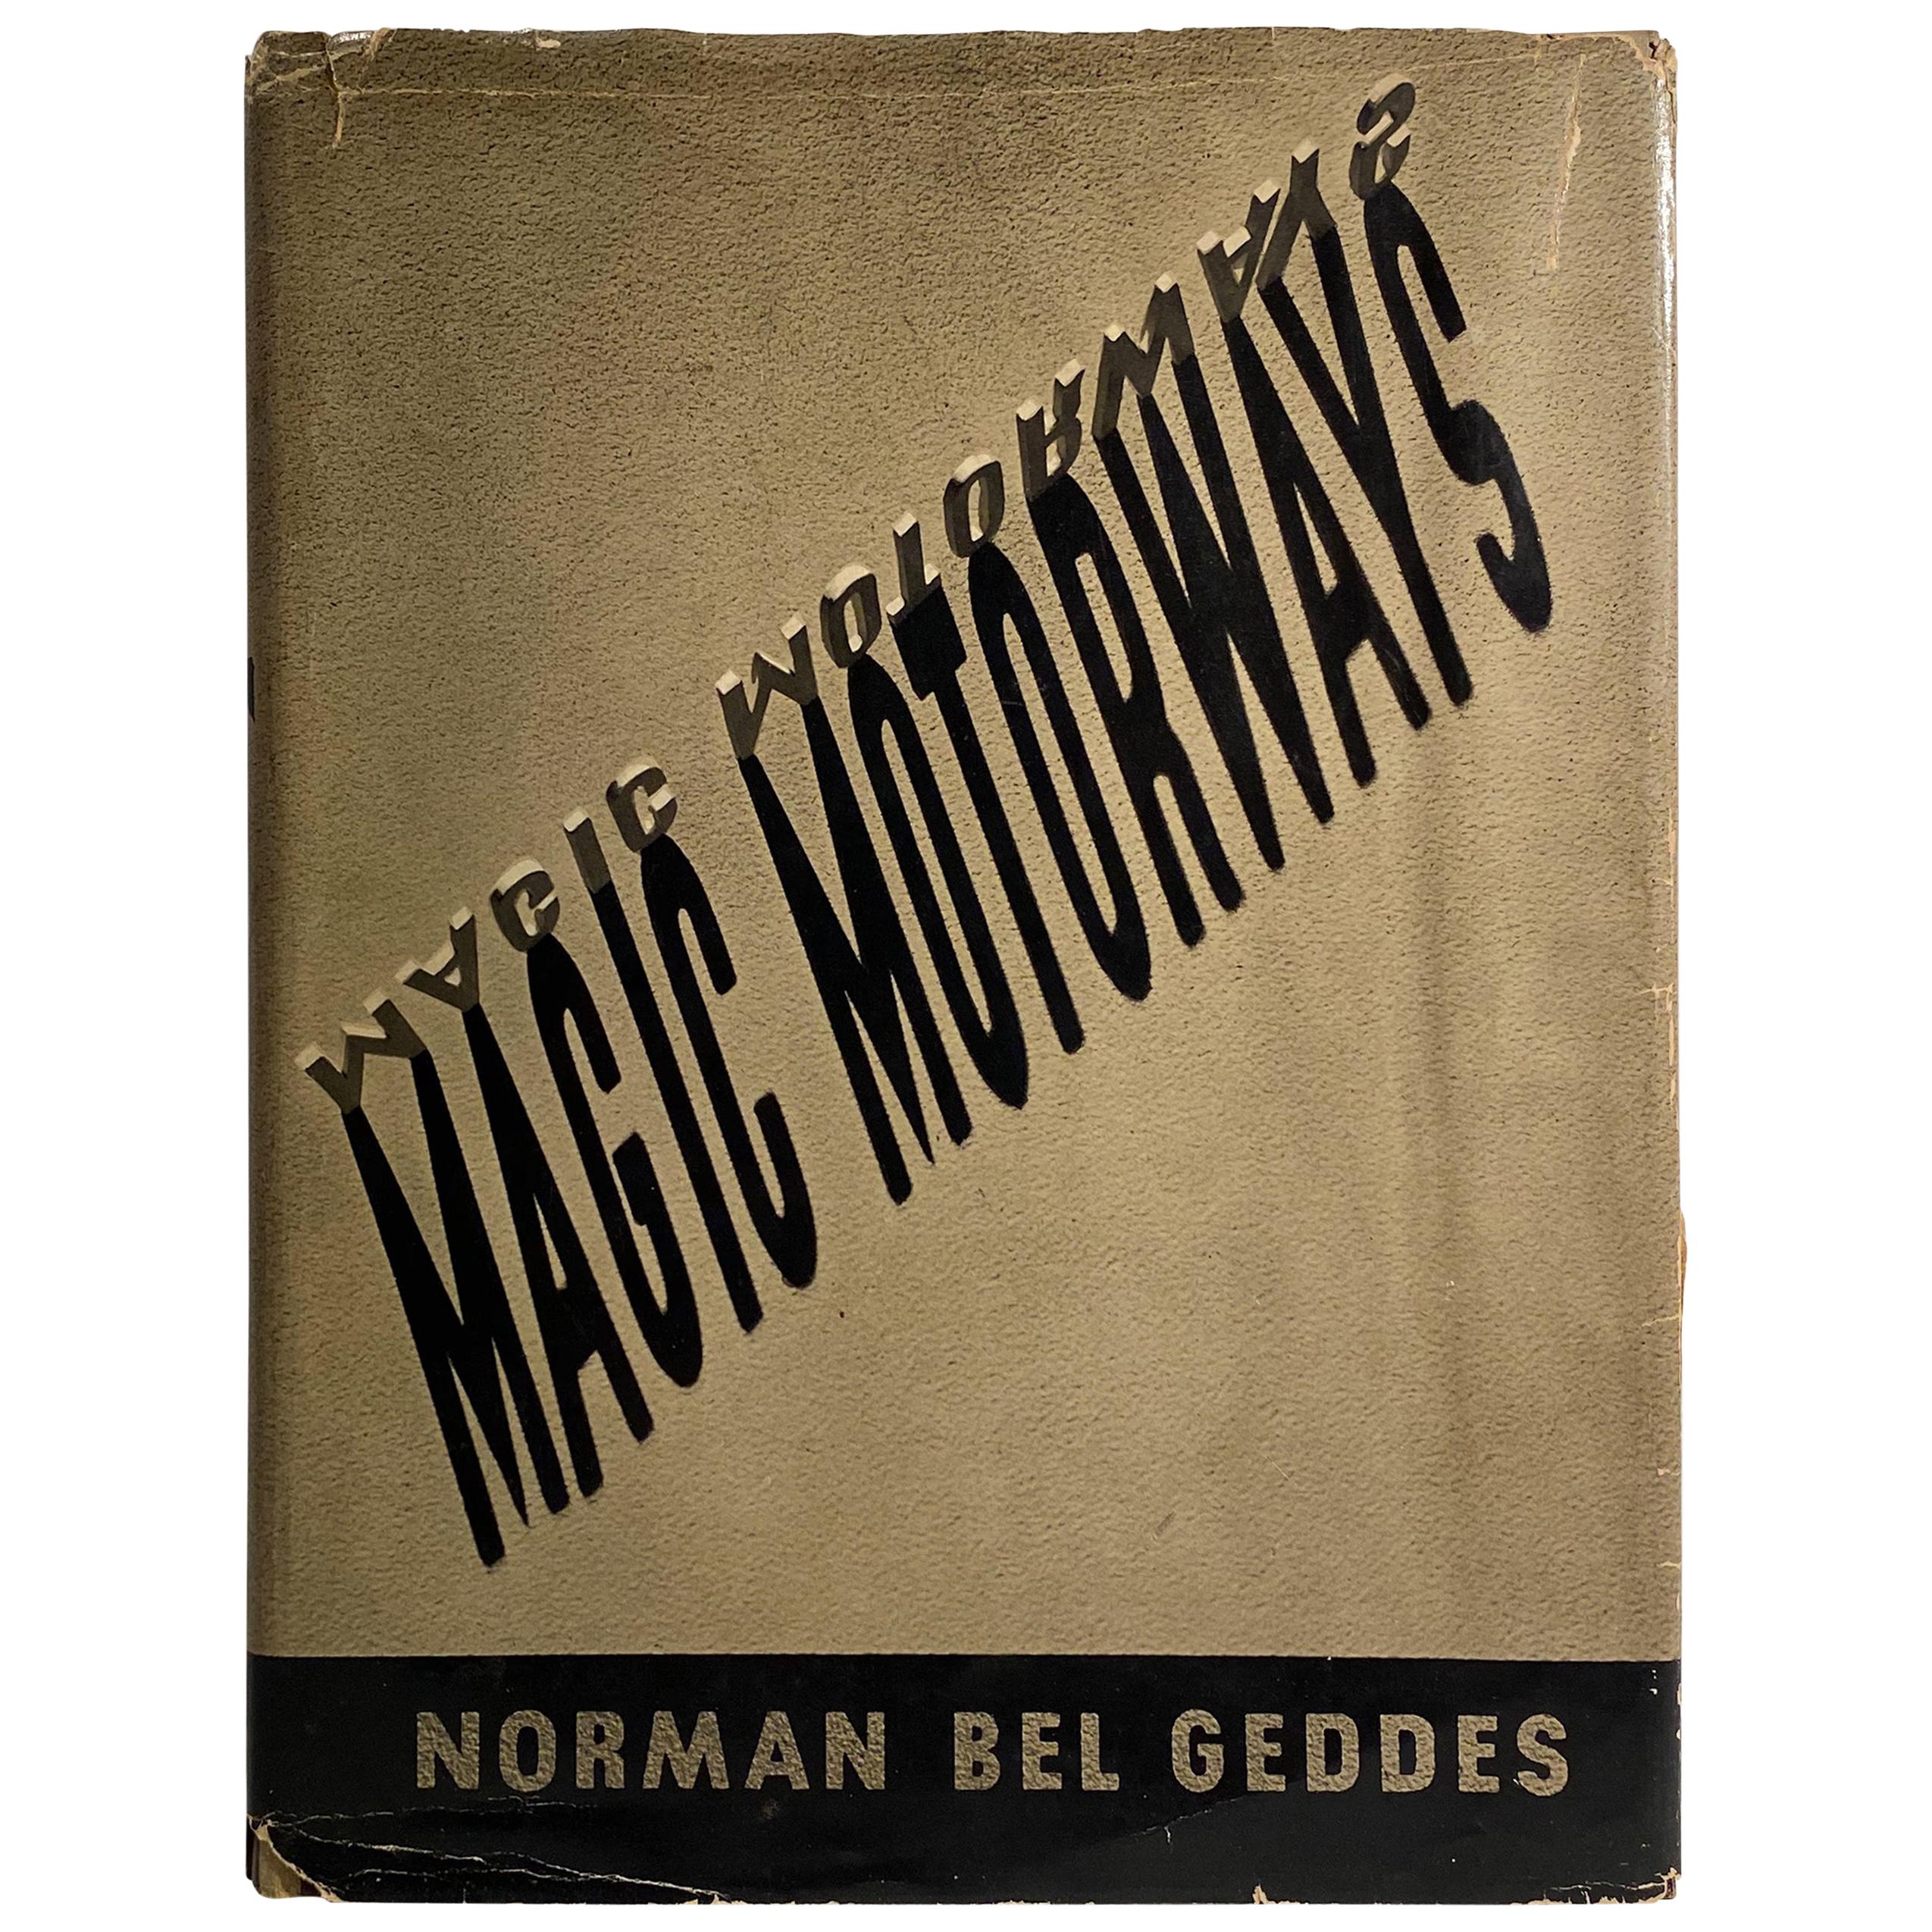 Signed Copy of Magic Motorways by Norman Bel Geddes